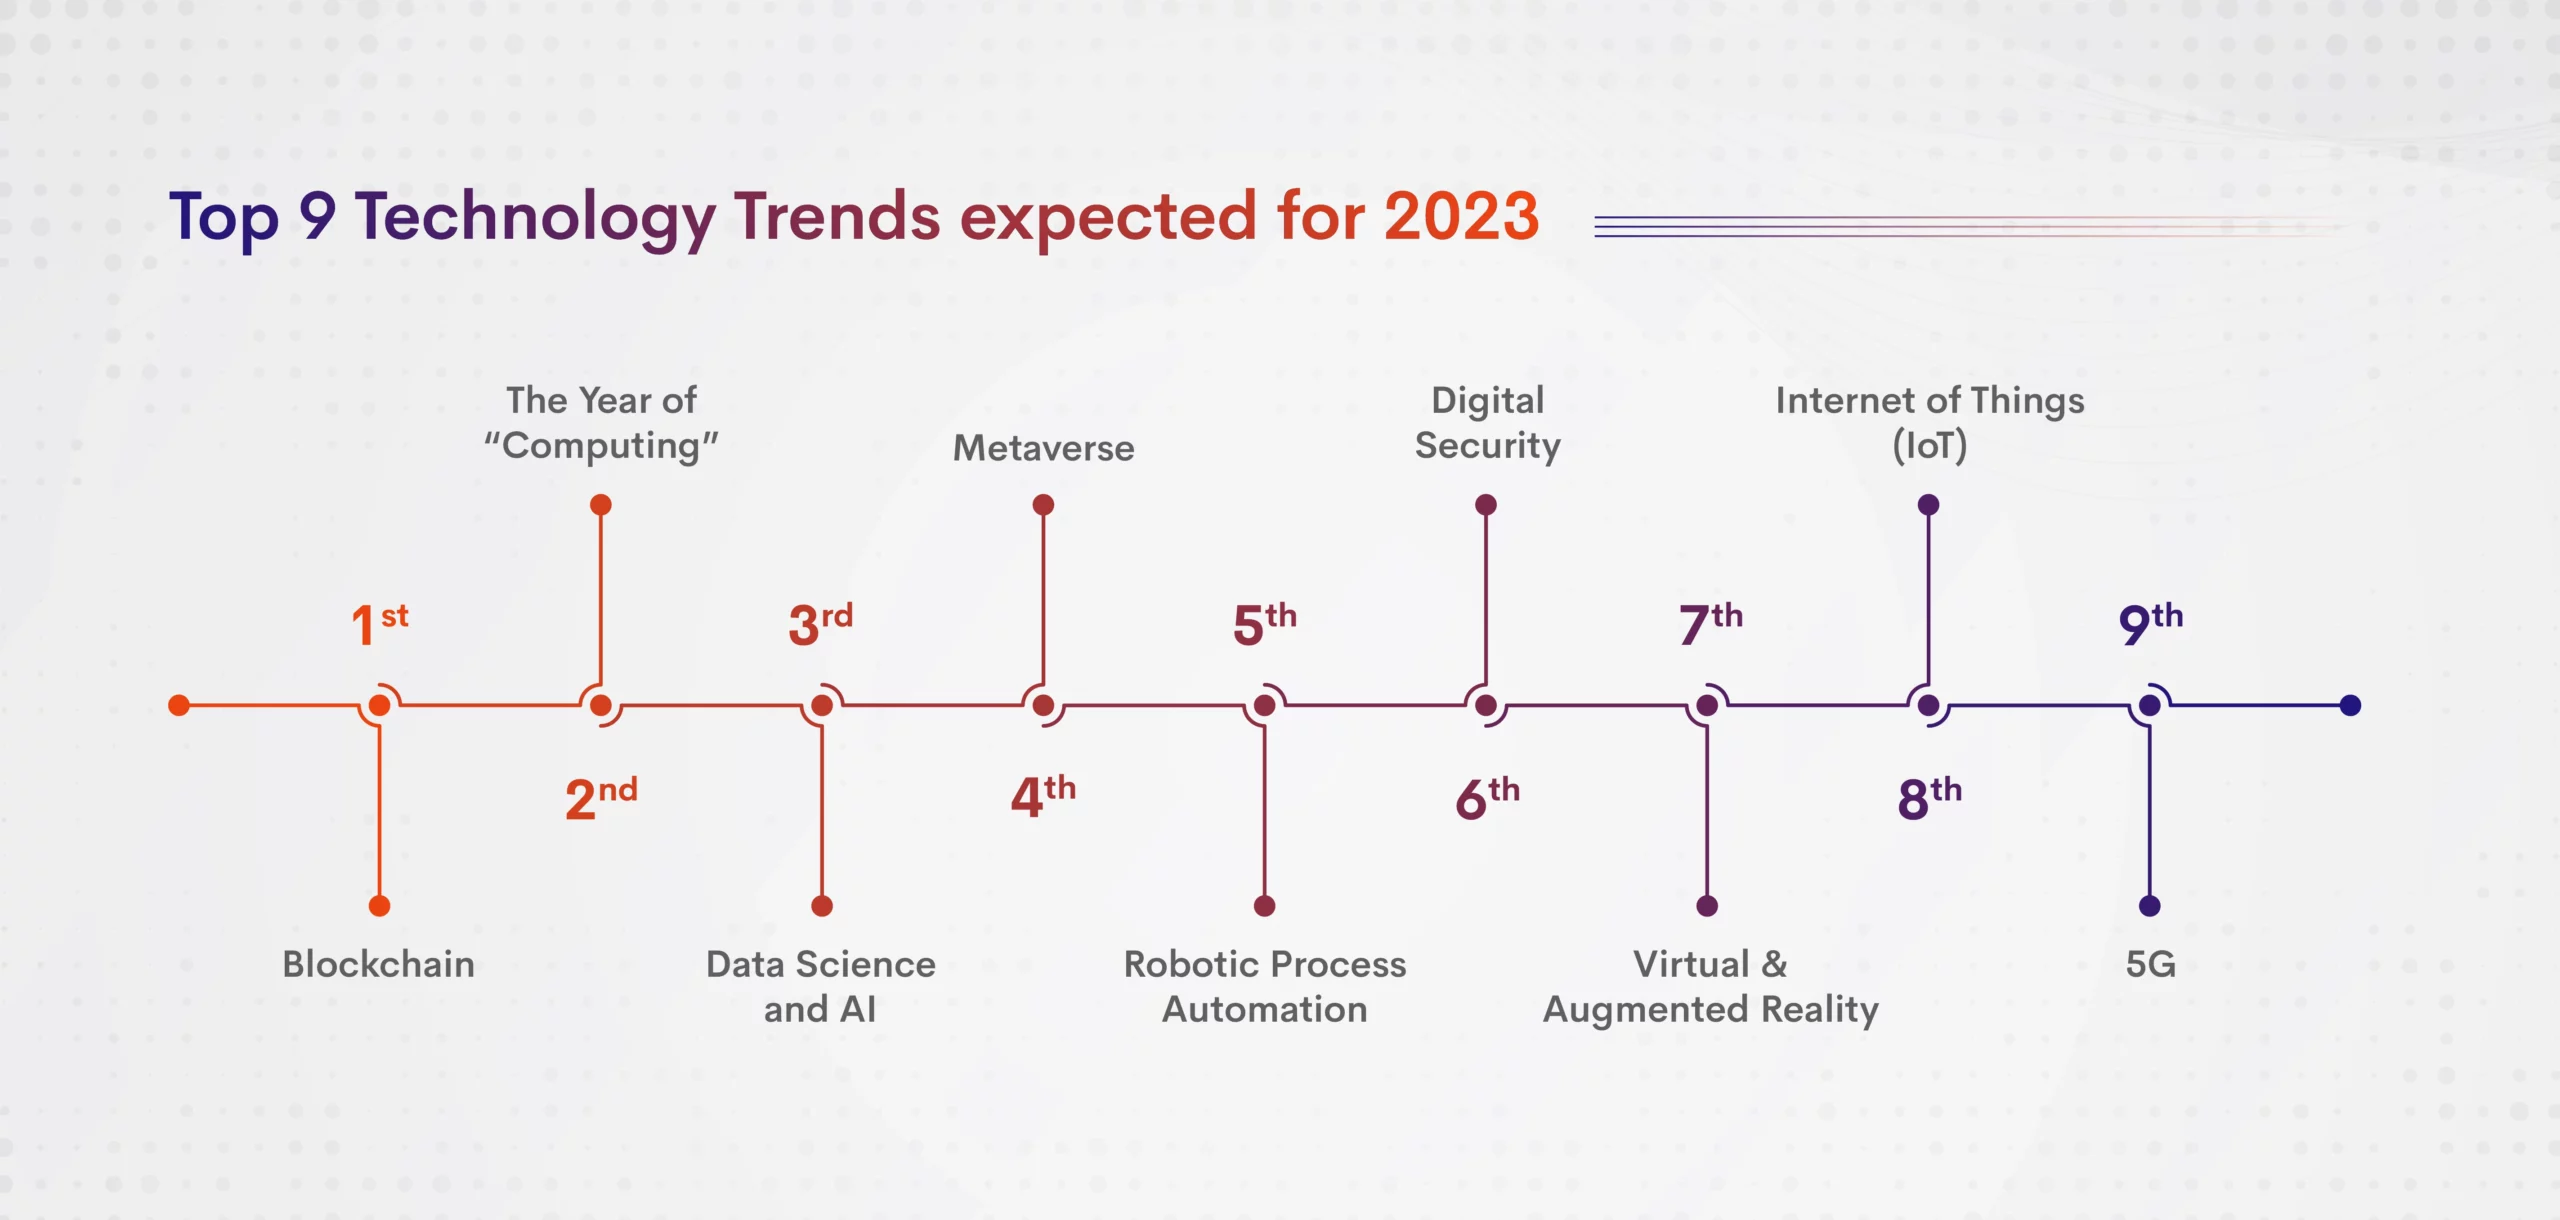 Top 9 Technology Trends expected for 2023